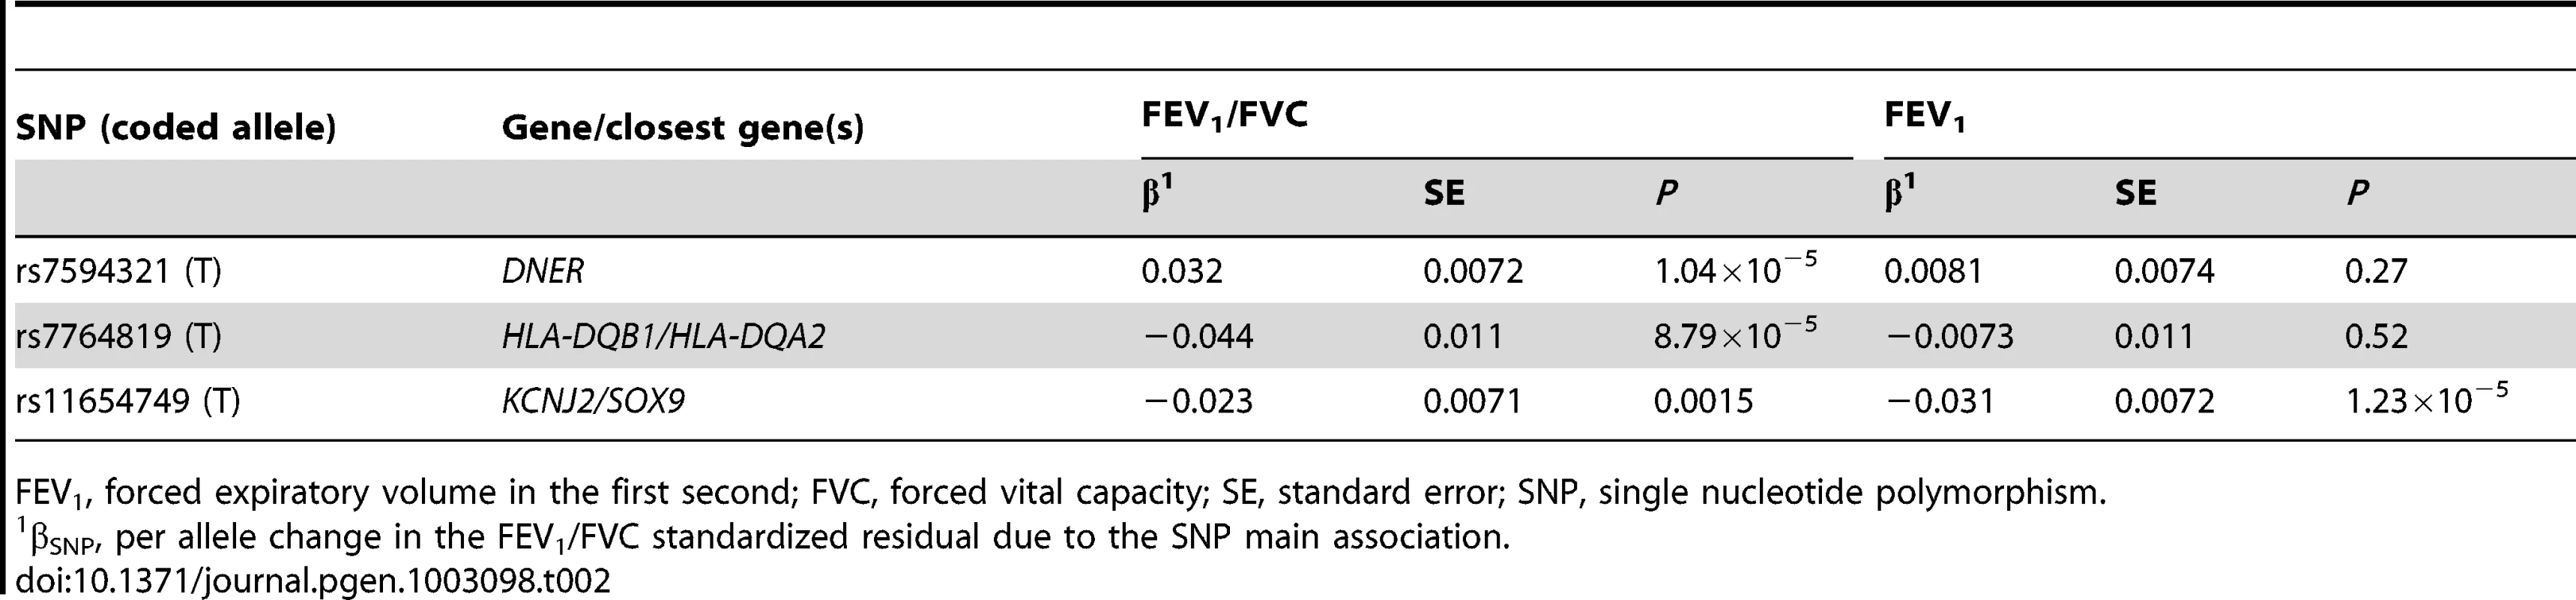 Look-up evaluation of SNP main associations with FEV<sub>1</sub>/FVC and FEV<sub>1</sub> using data generated by our previous genome-wide association study meta-analysis (N = 48,201), for the most significant SNP from each of the three novel loci implicated at genome-wide significance in the joint meta-analysis.